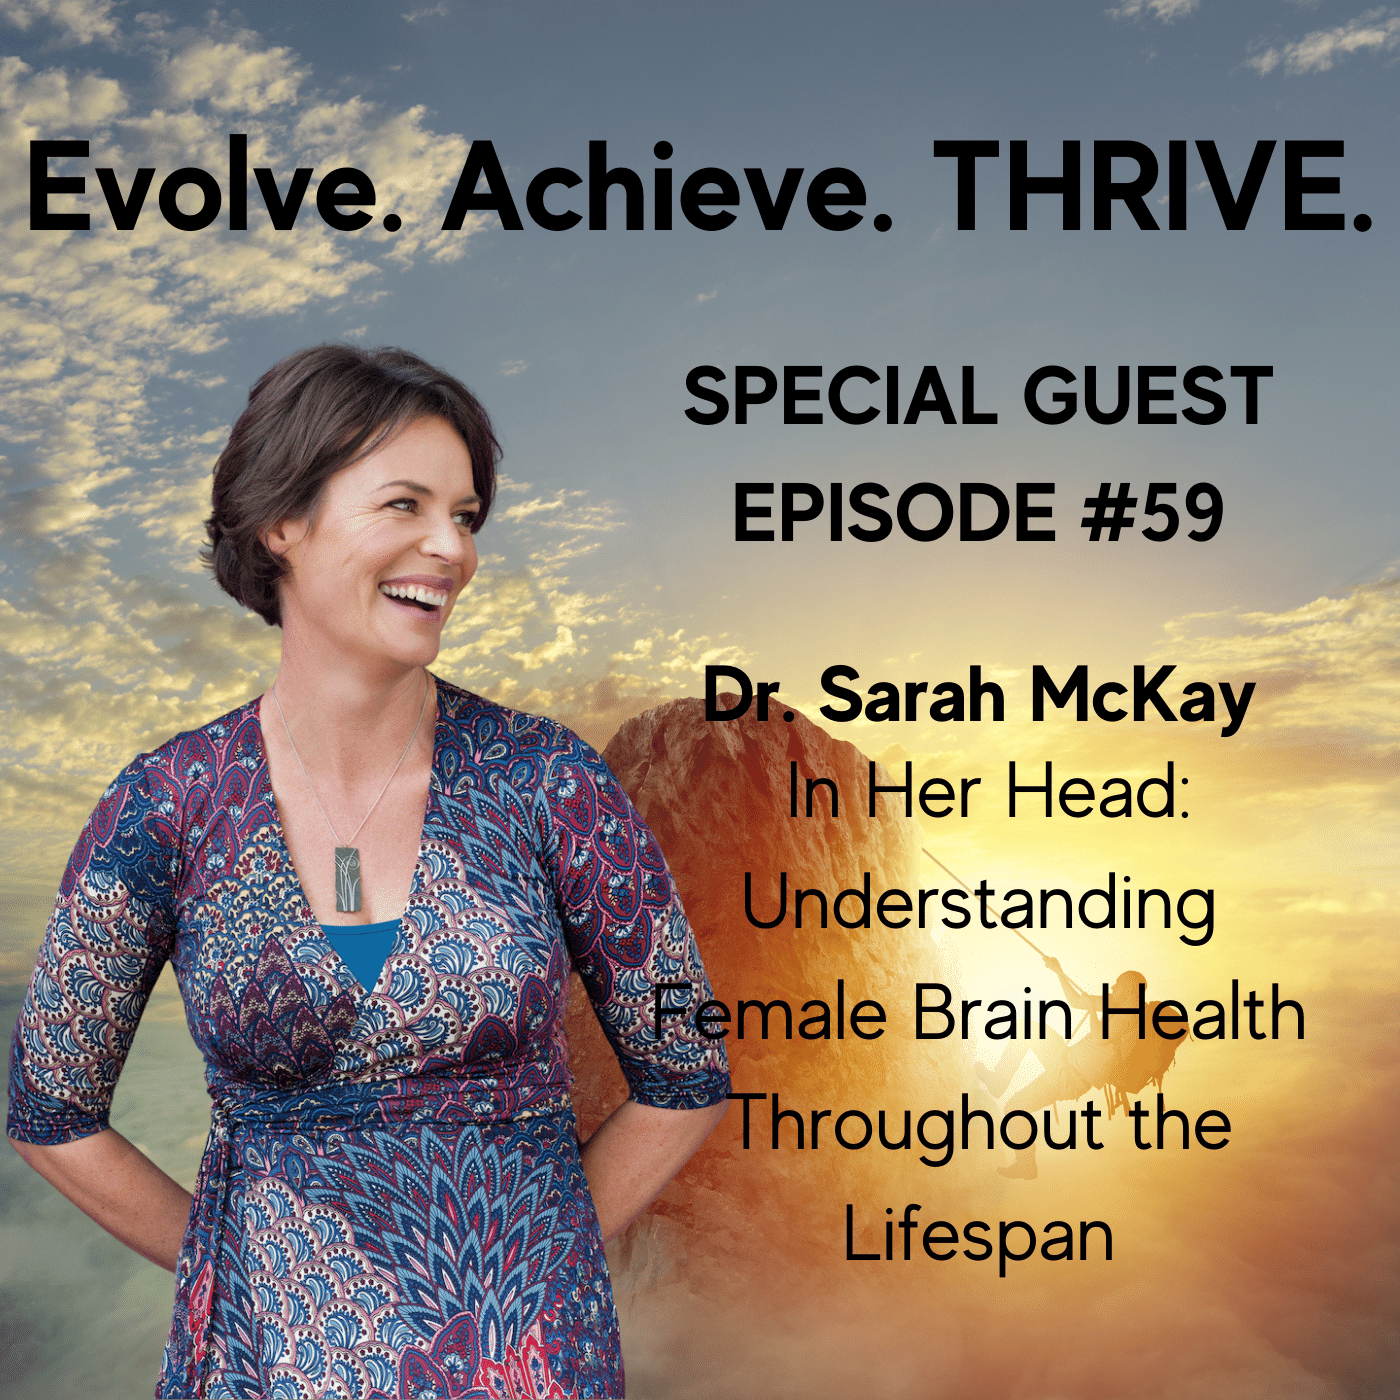 #59 In Her Head: Understanding Female Brain Health Throughout the Lifespan with Dr. Sarah McKay